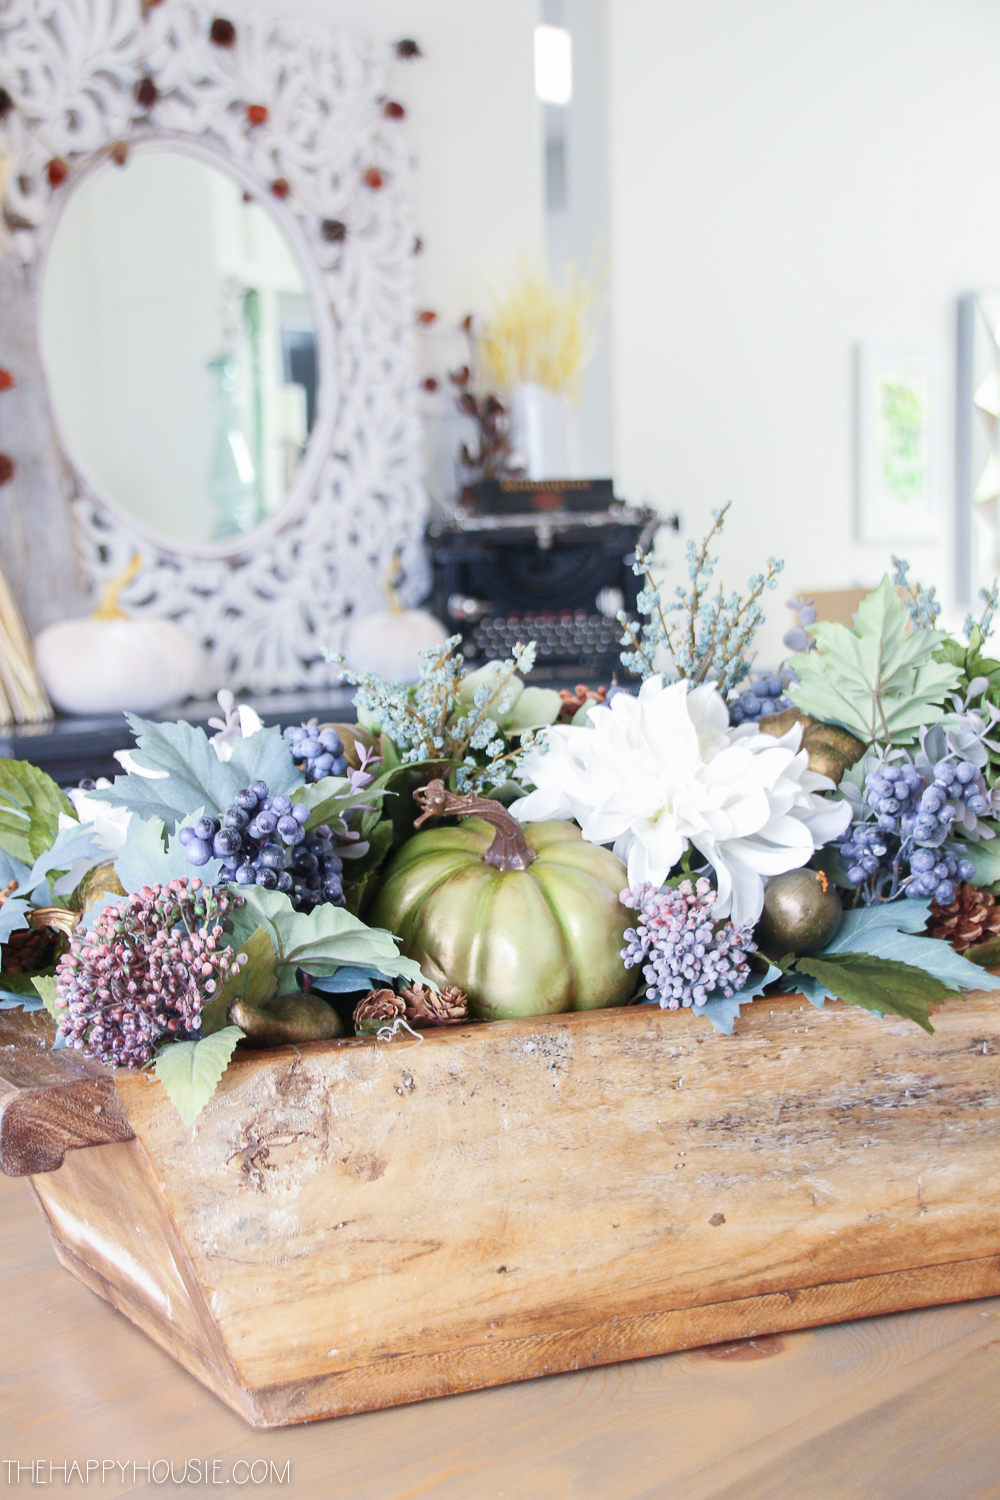 Florals, pumpkins and berry centerpiece on the table.